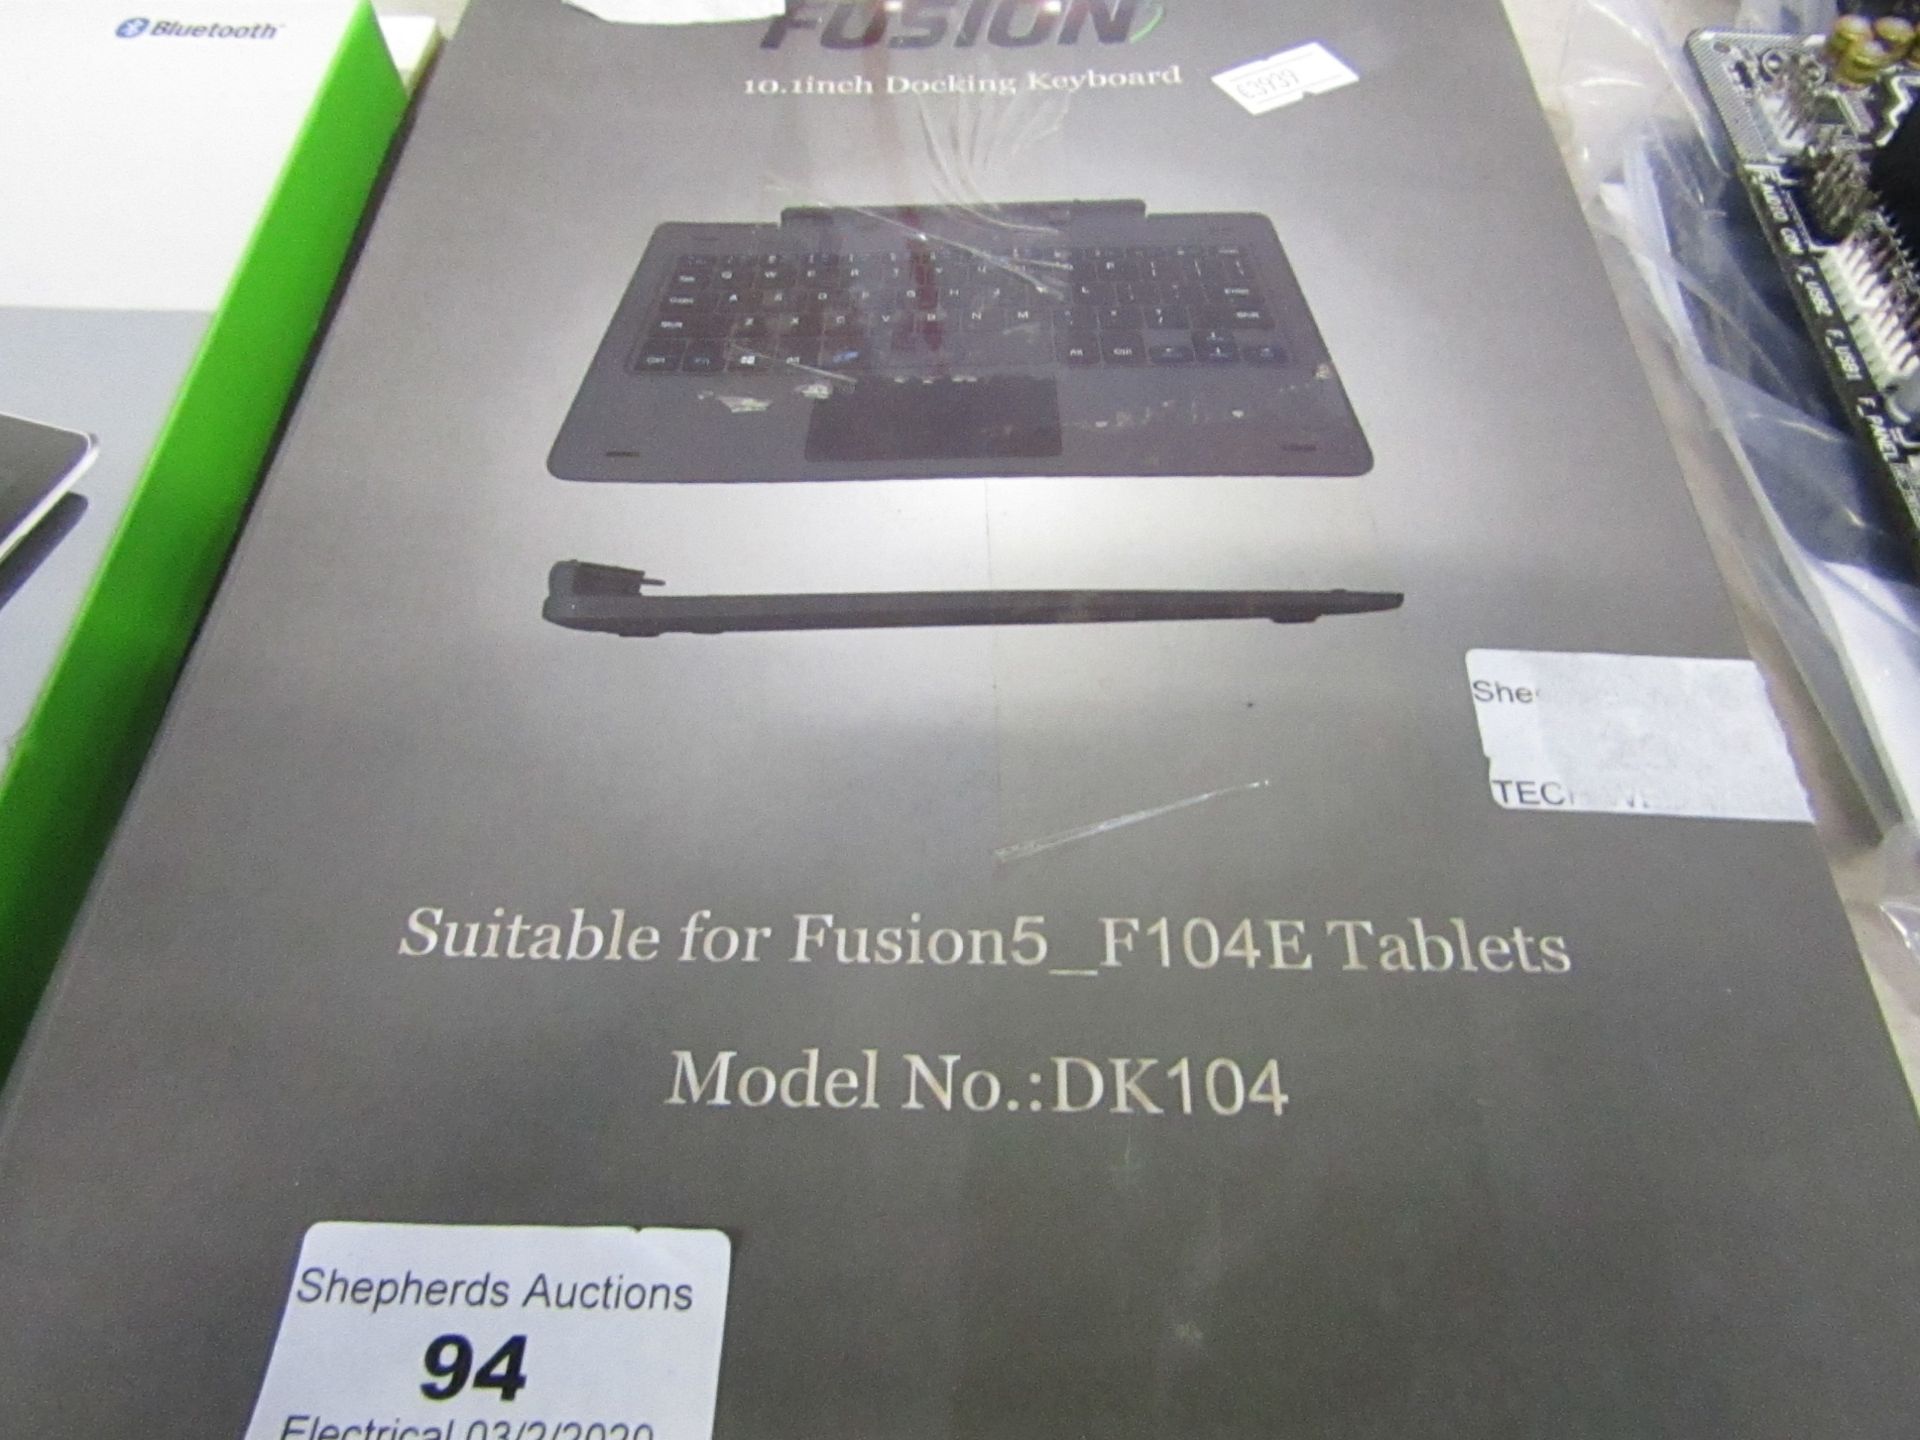 FUISON - 10.1" Docking Keyboard - Untested and boxed.